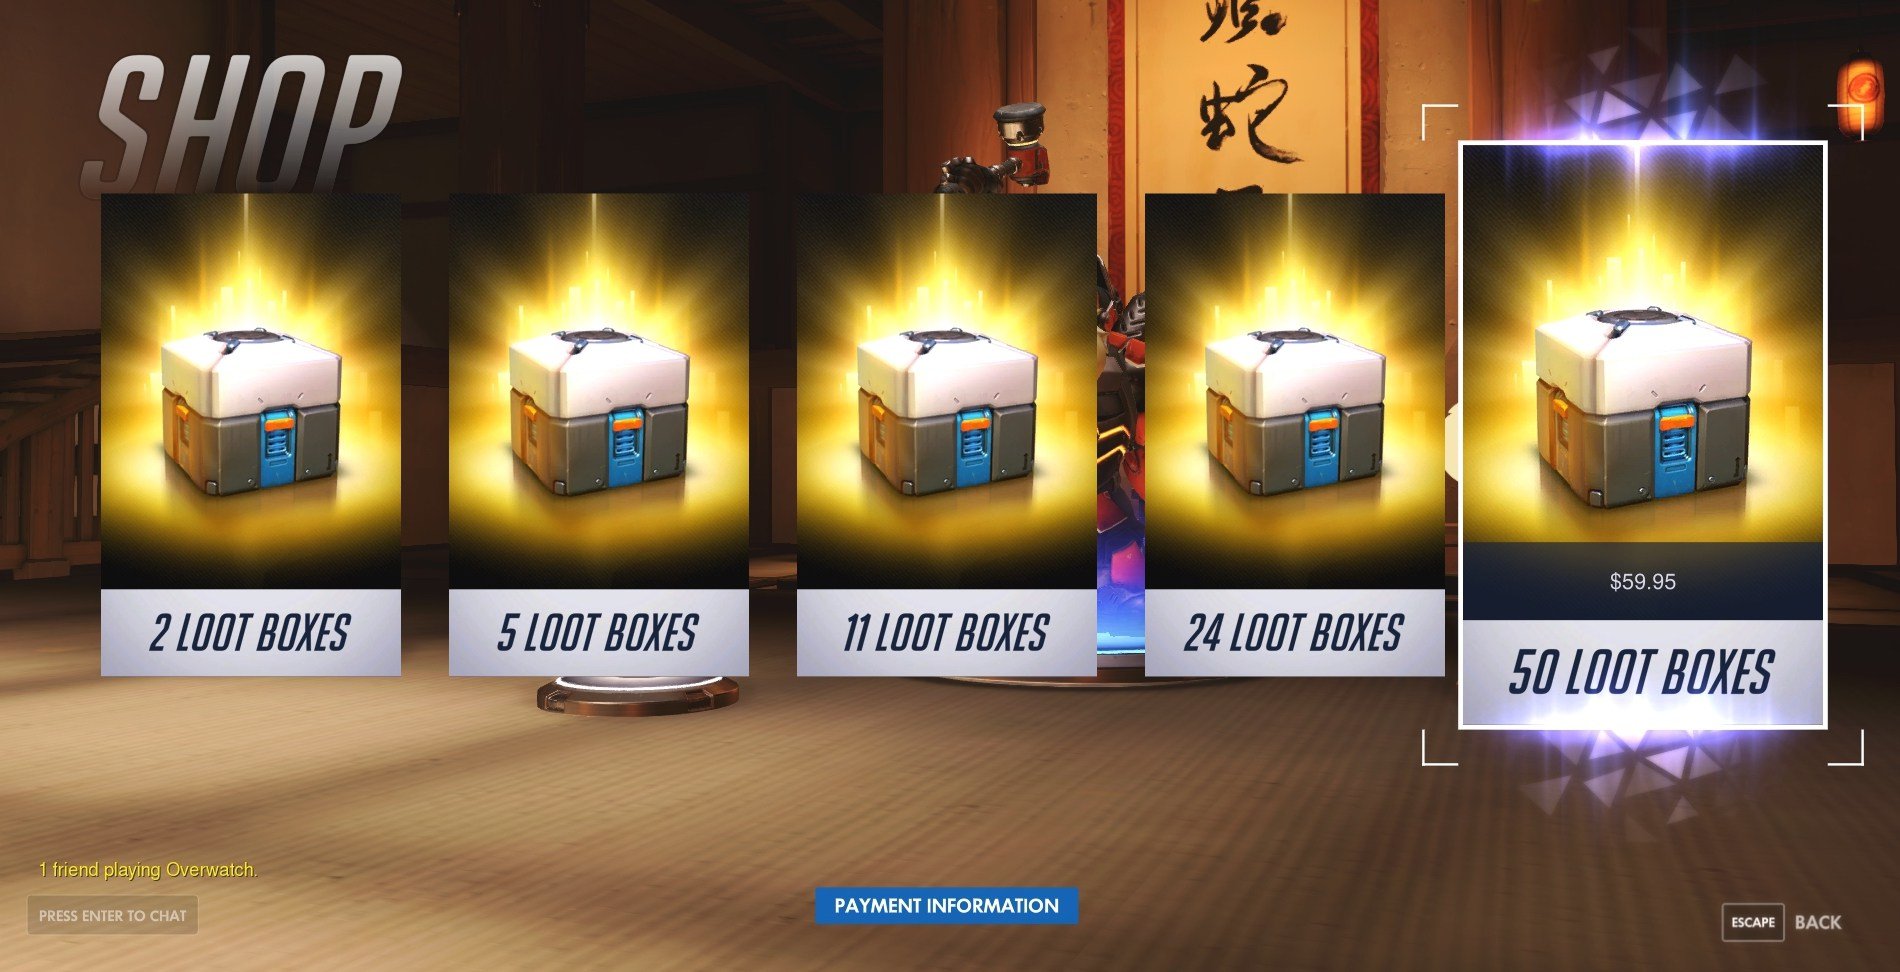 FIFA Loot Boxes Aren't Gambling According to UK Commission